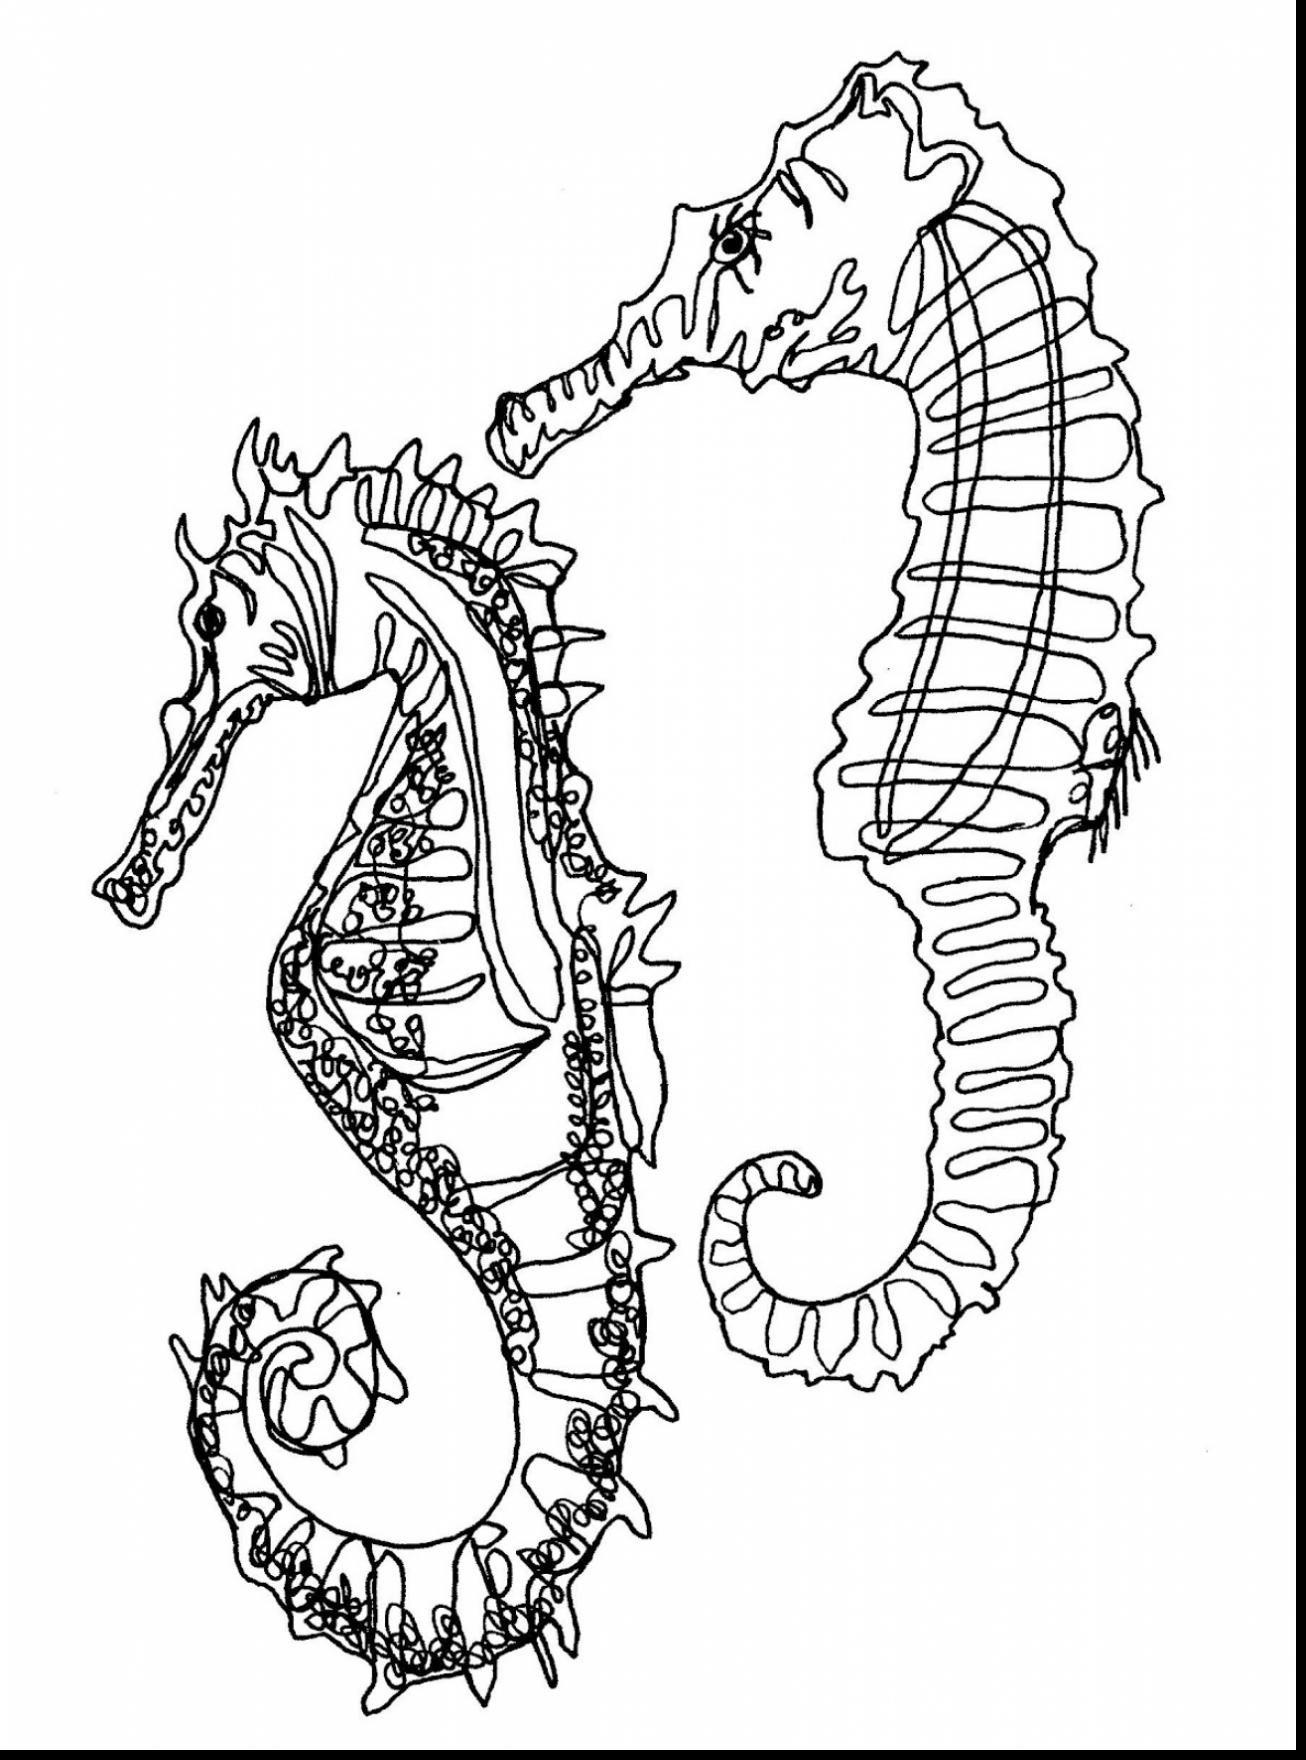 Seahorse Drawing at GetDrawings.com | Free for personal ...